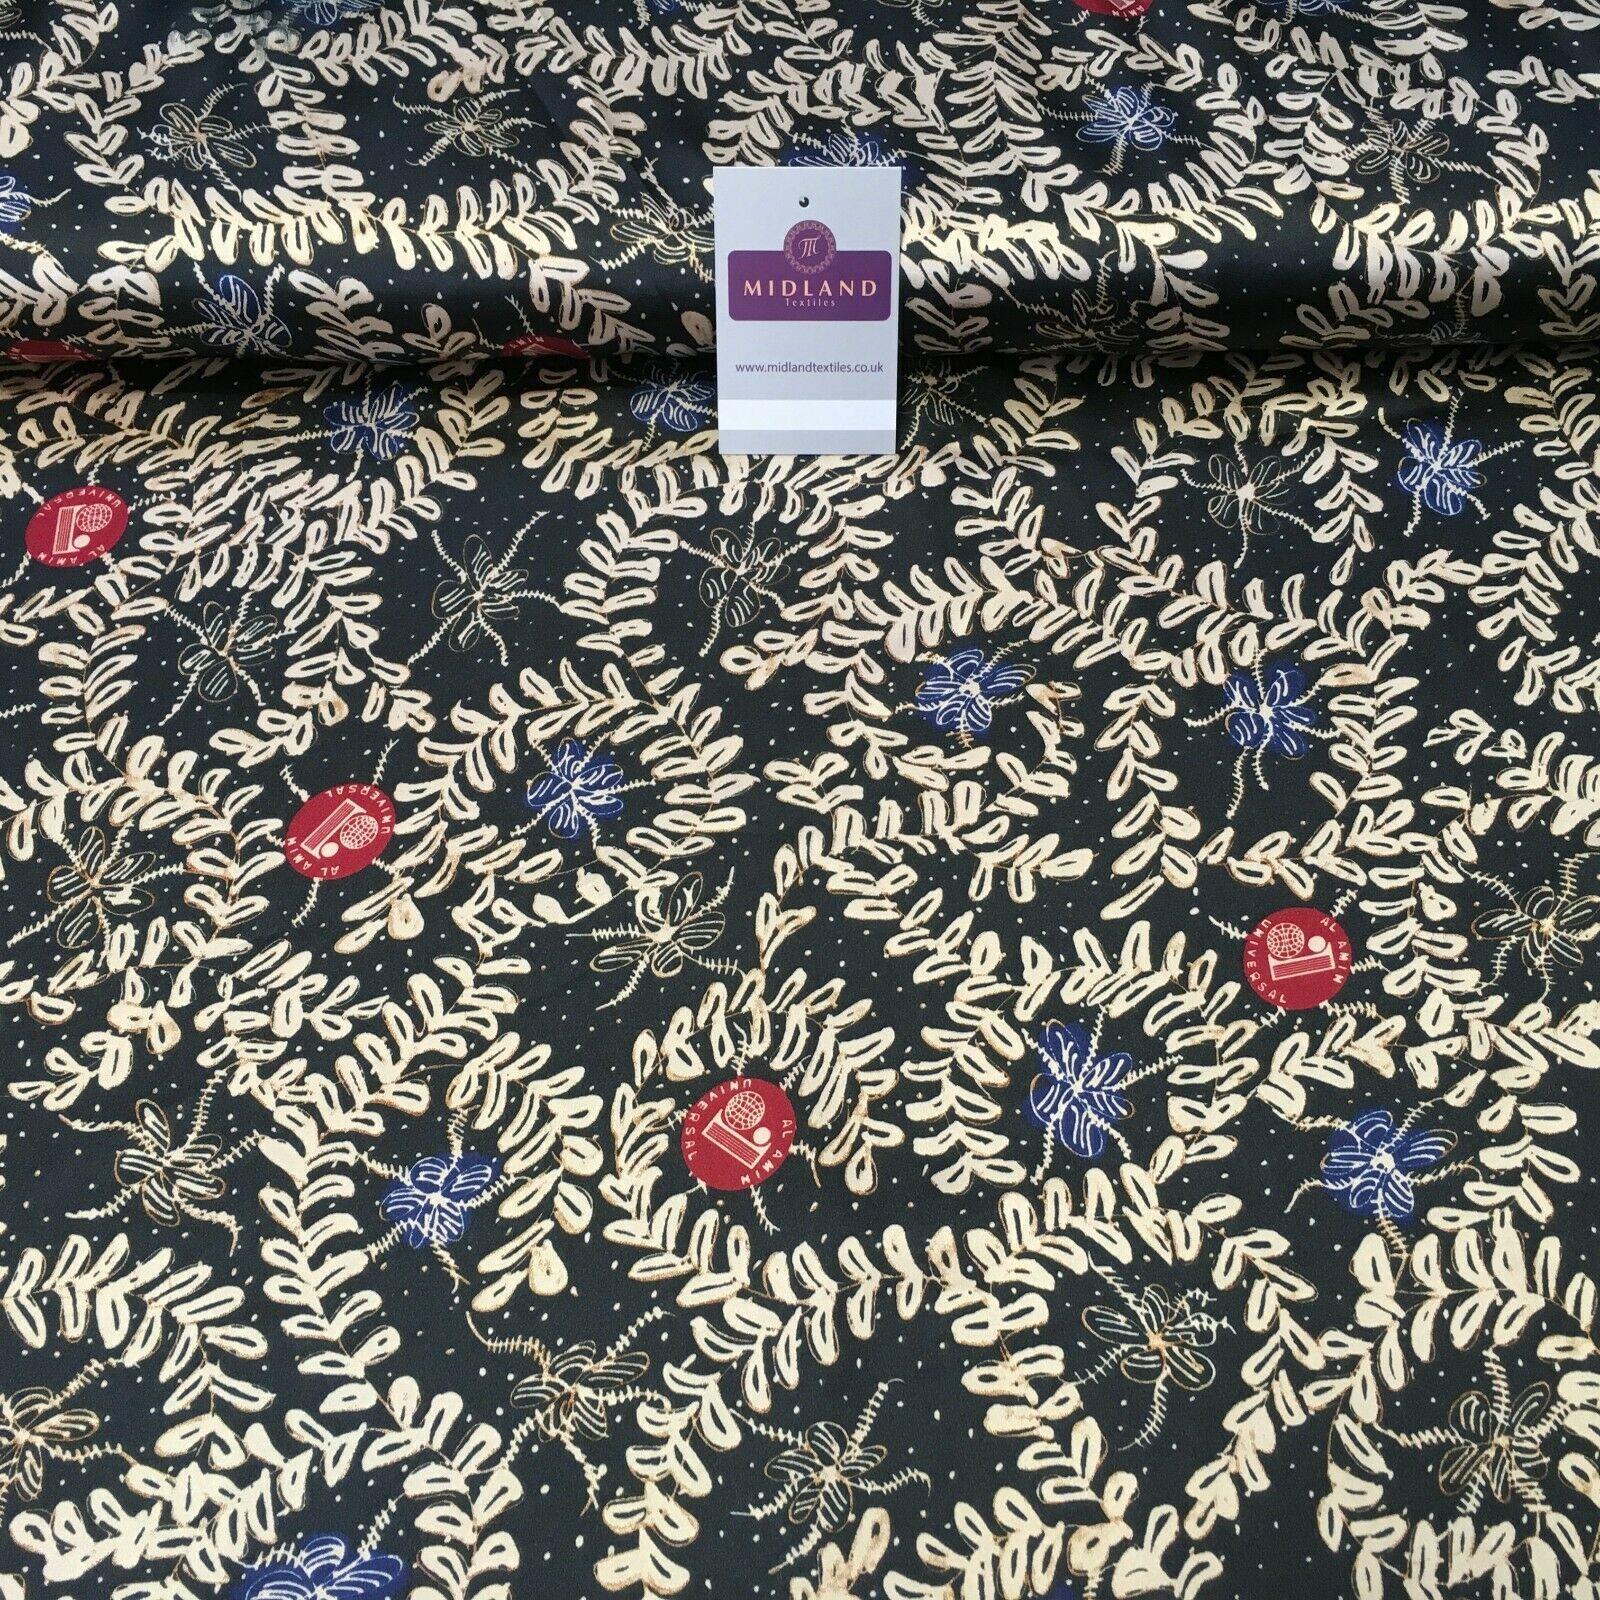 Black and Gold Floral Printed Satin Dress fabric 150cm Wide M1115 Mtex